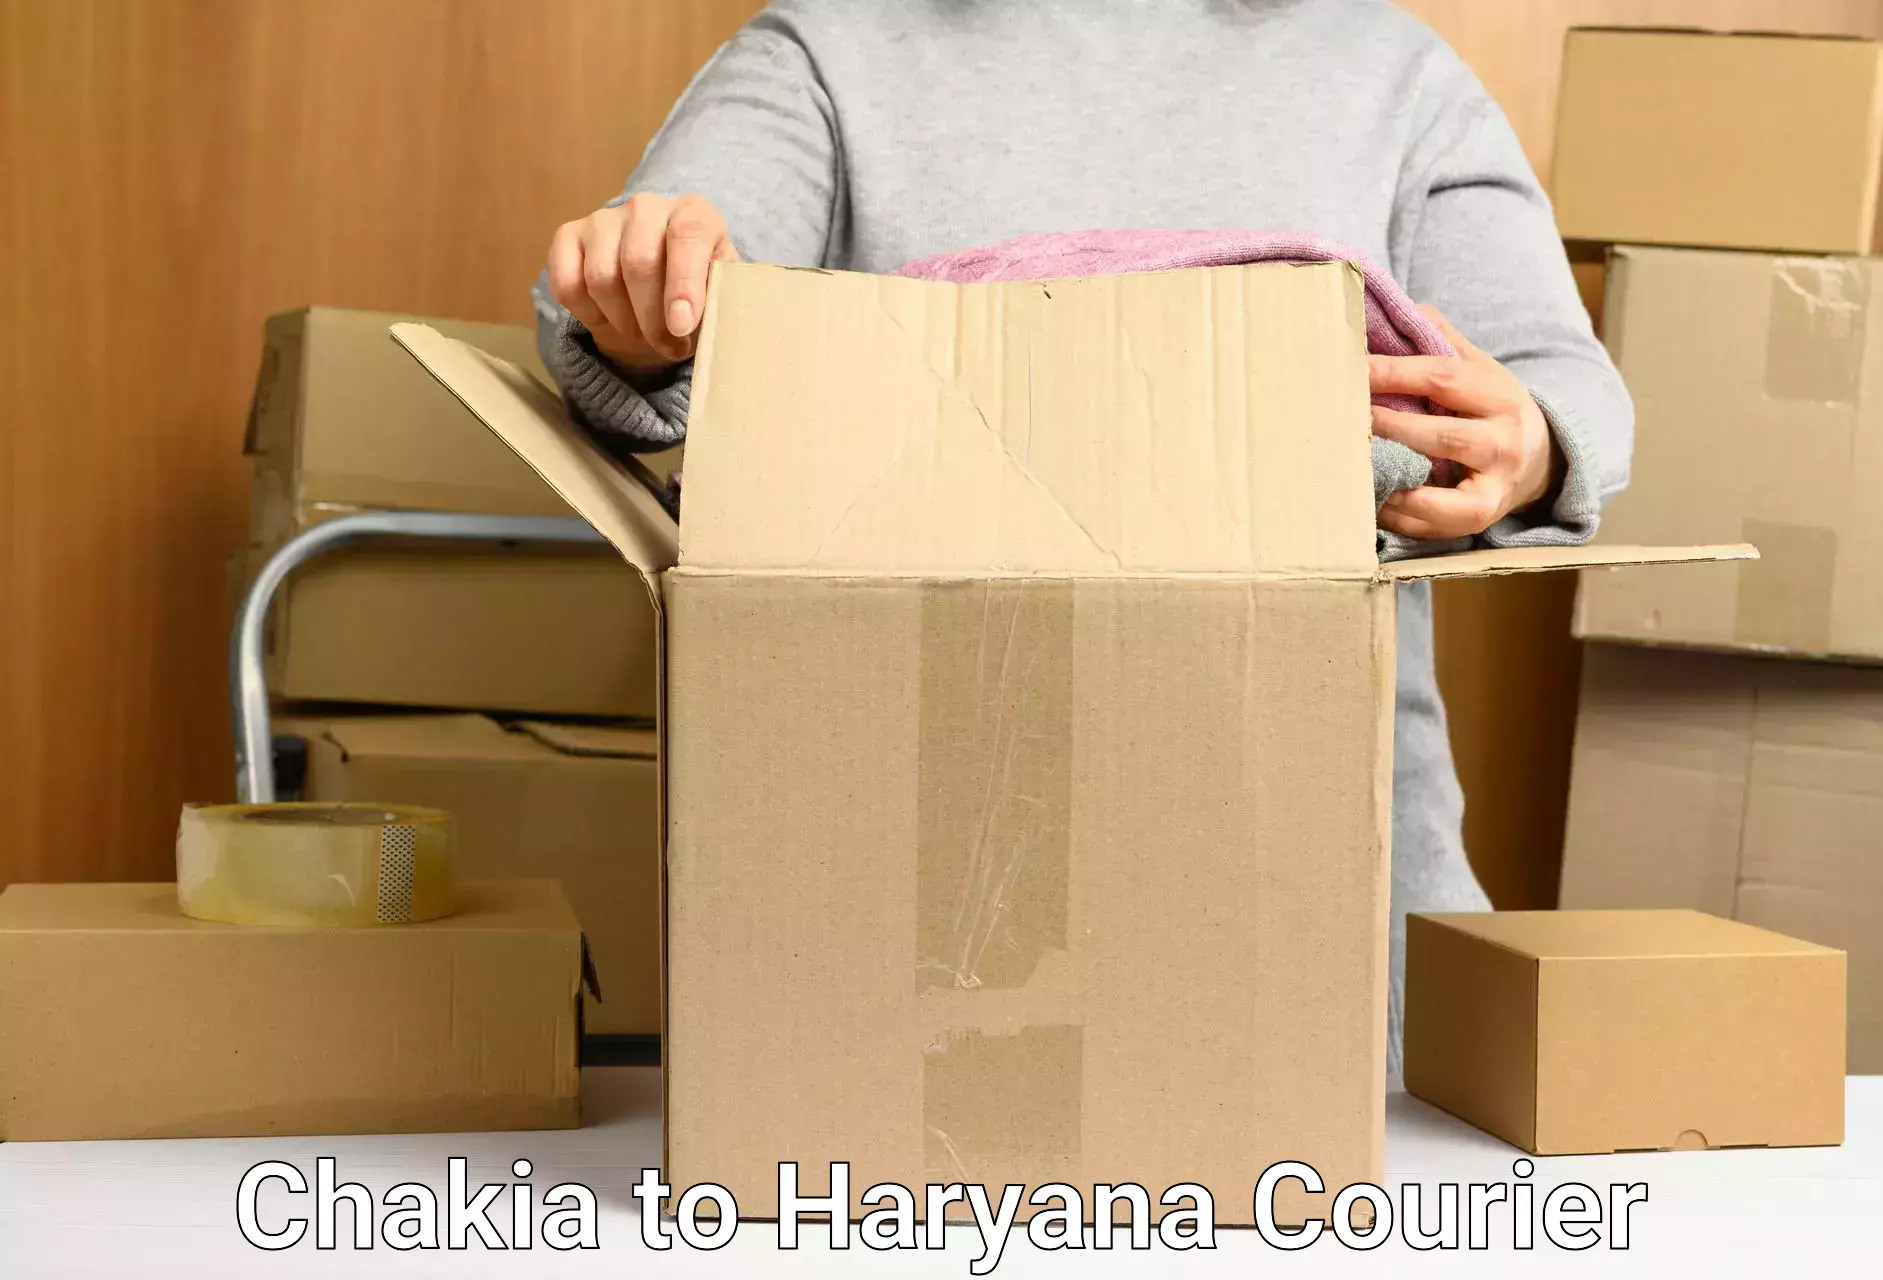 User-friendly delivery service Chakia to Chirya